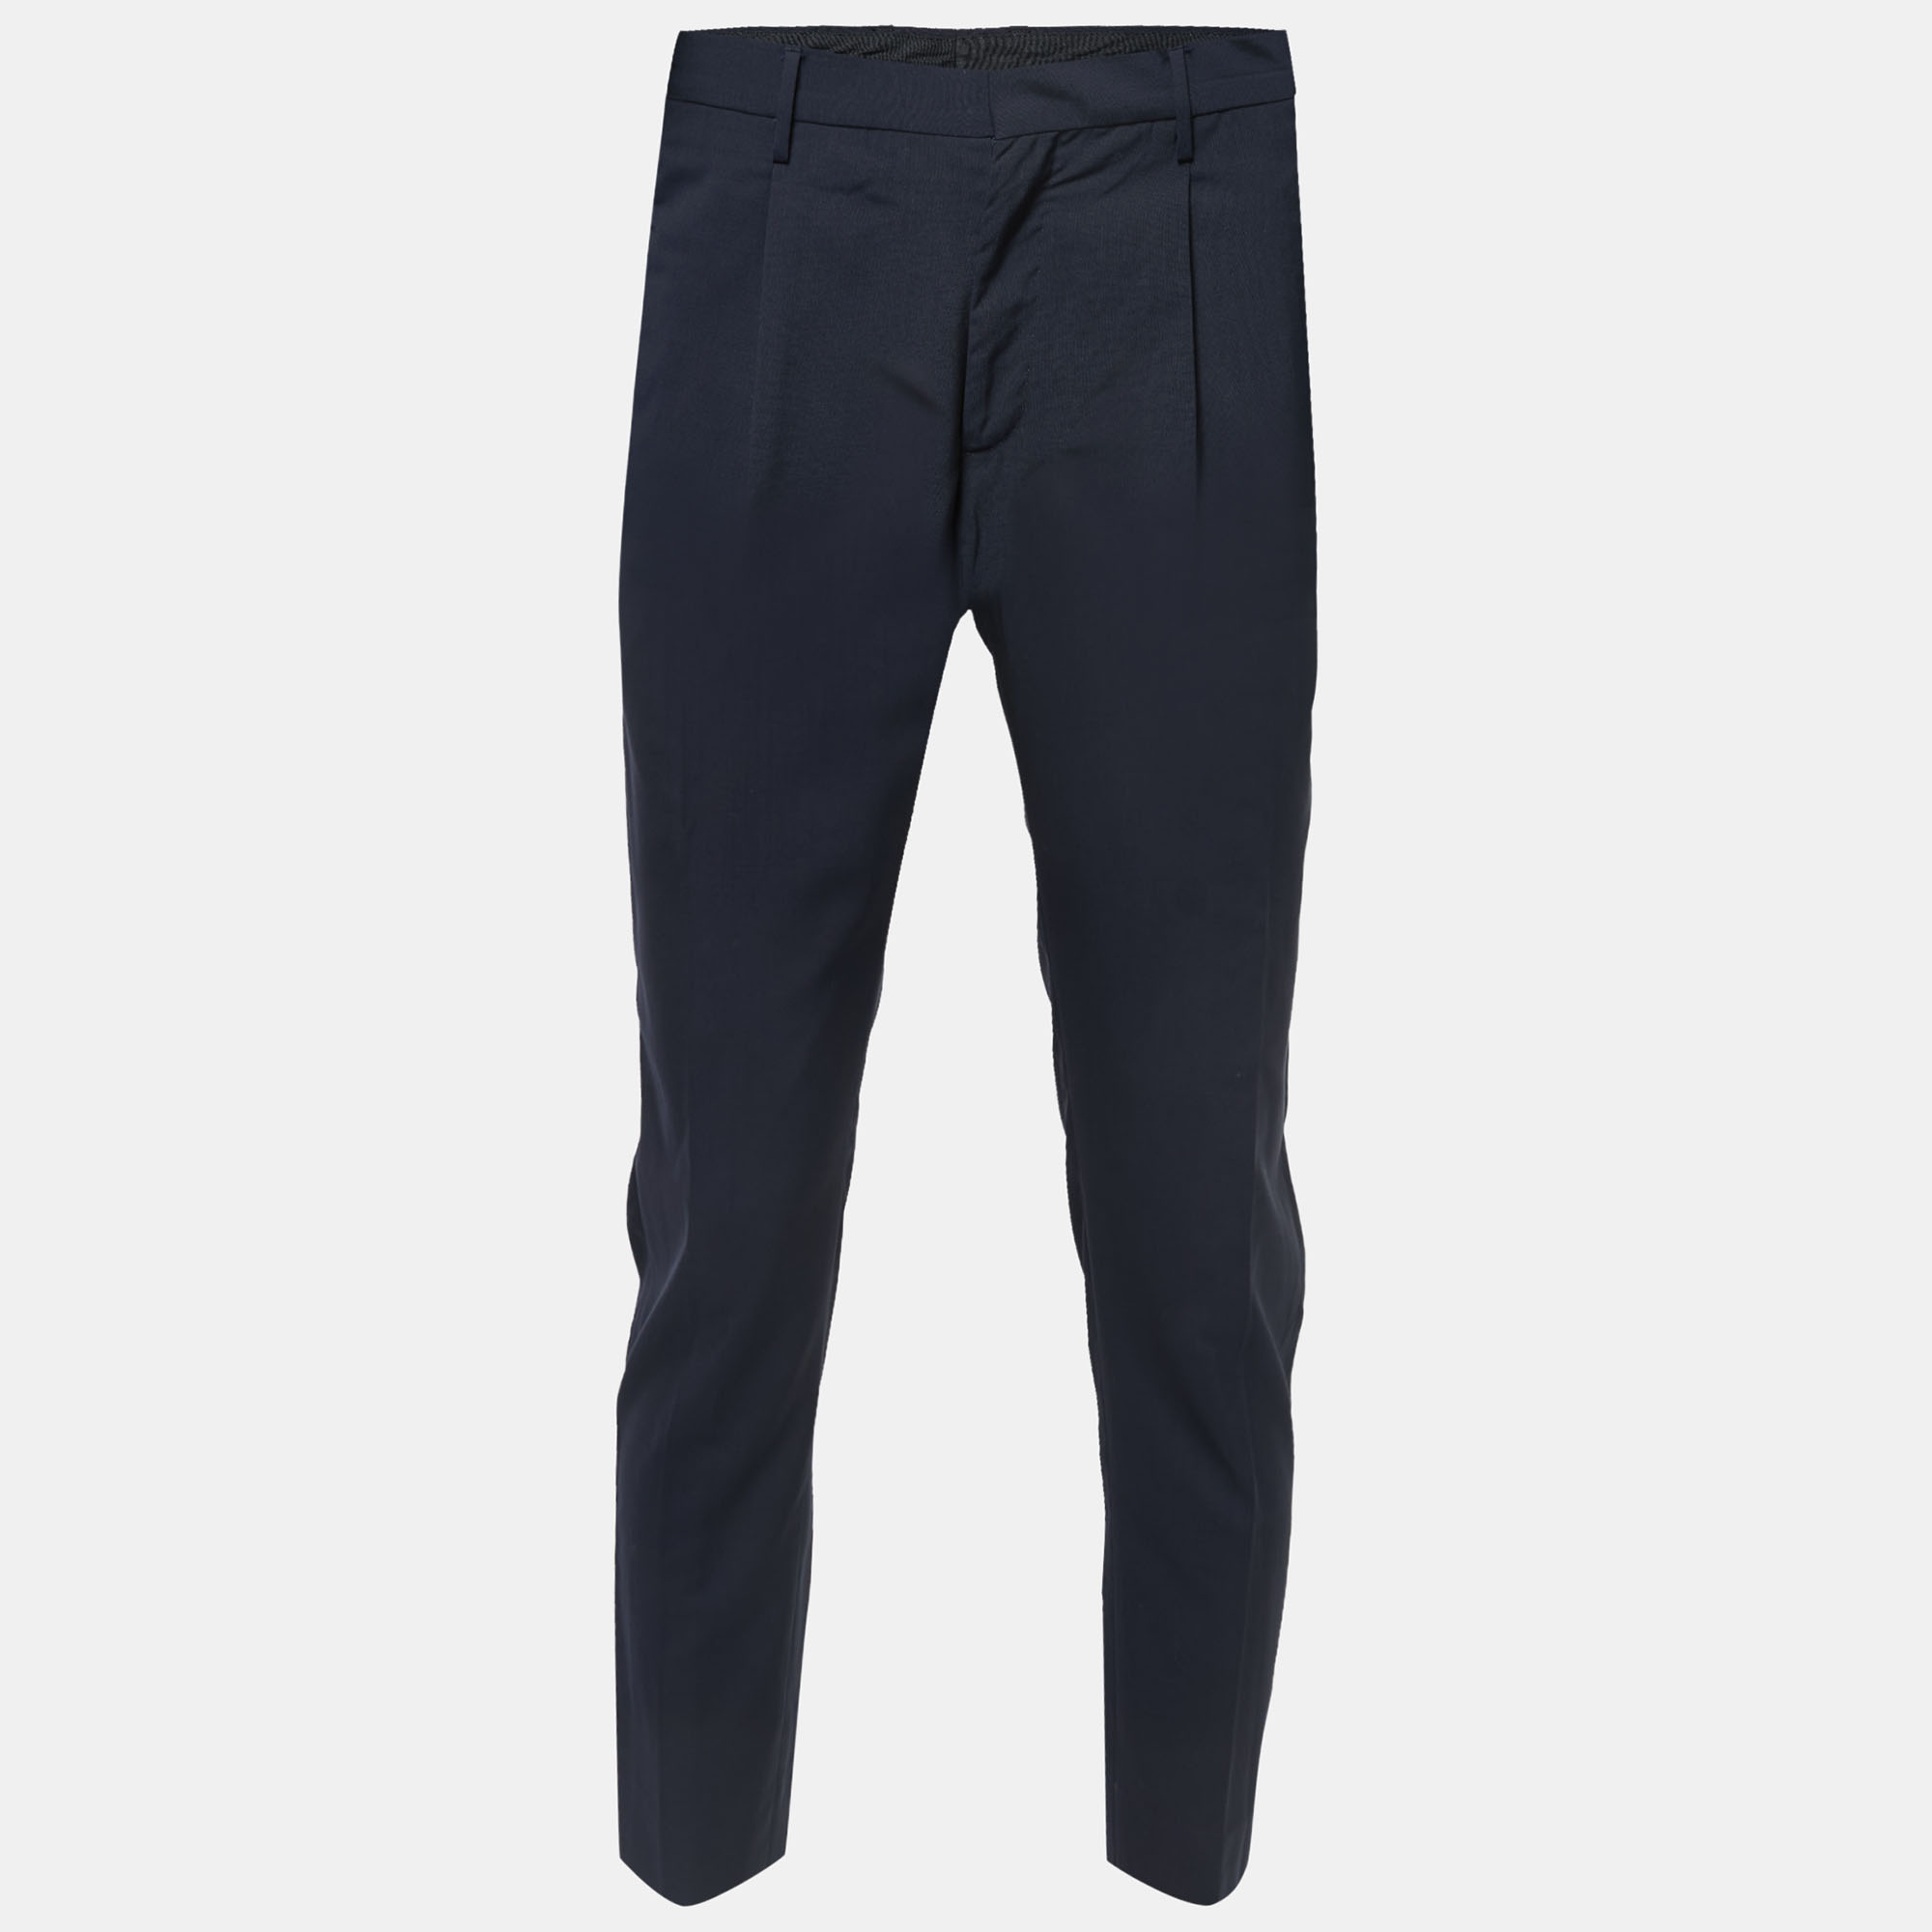 Valentino navy blue wool trousers s